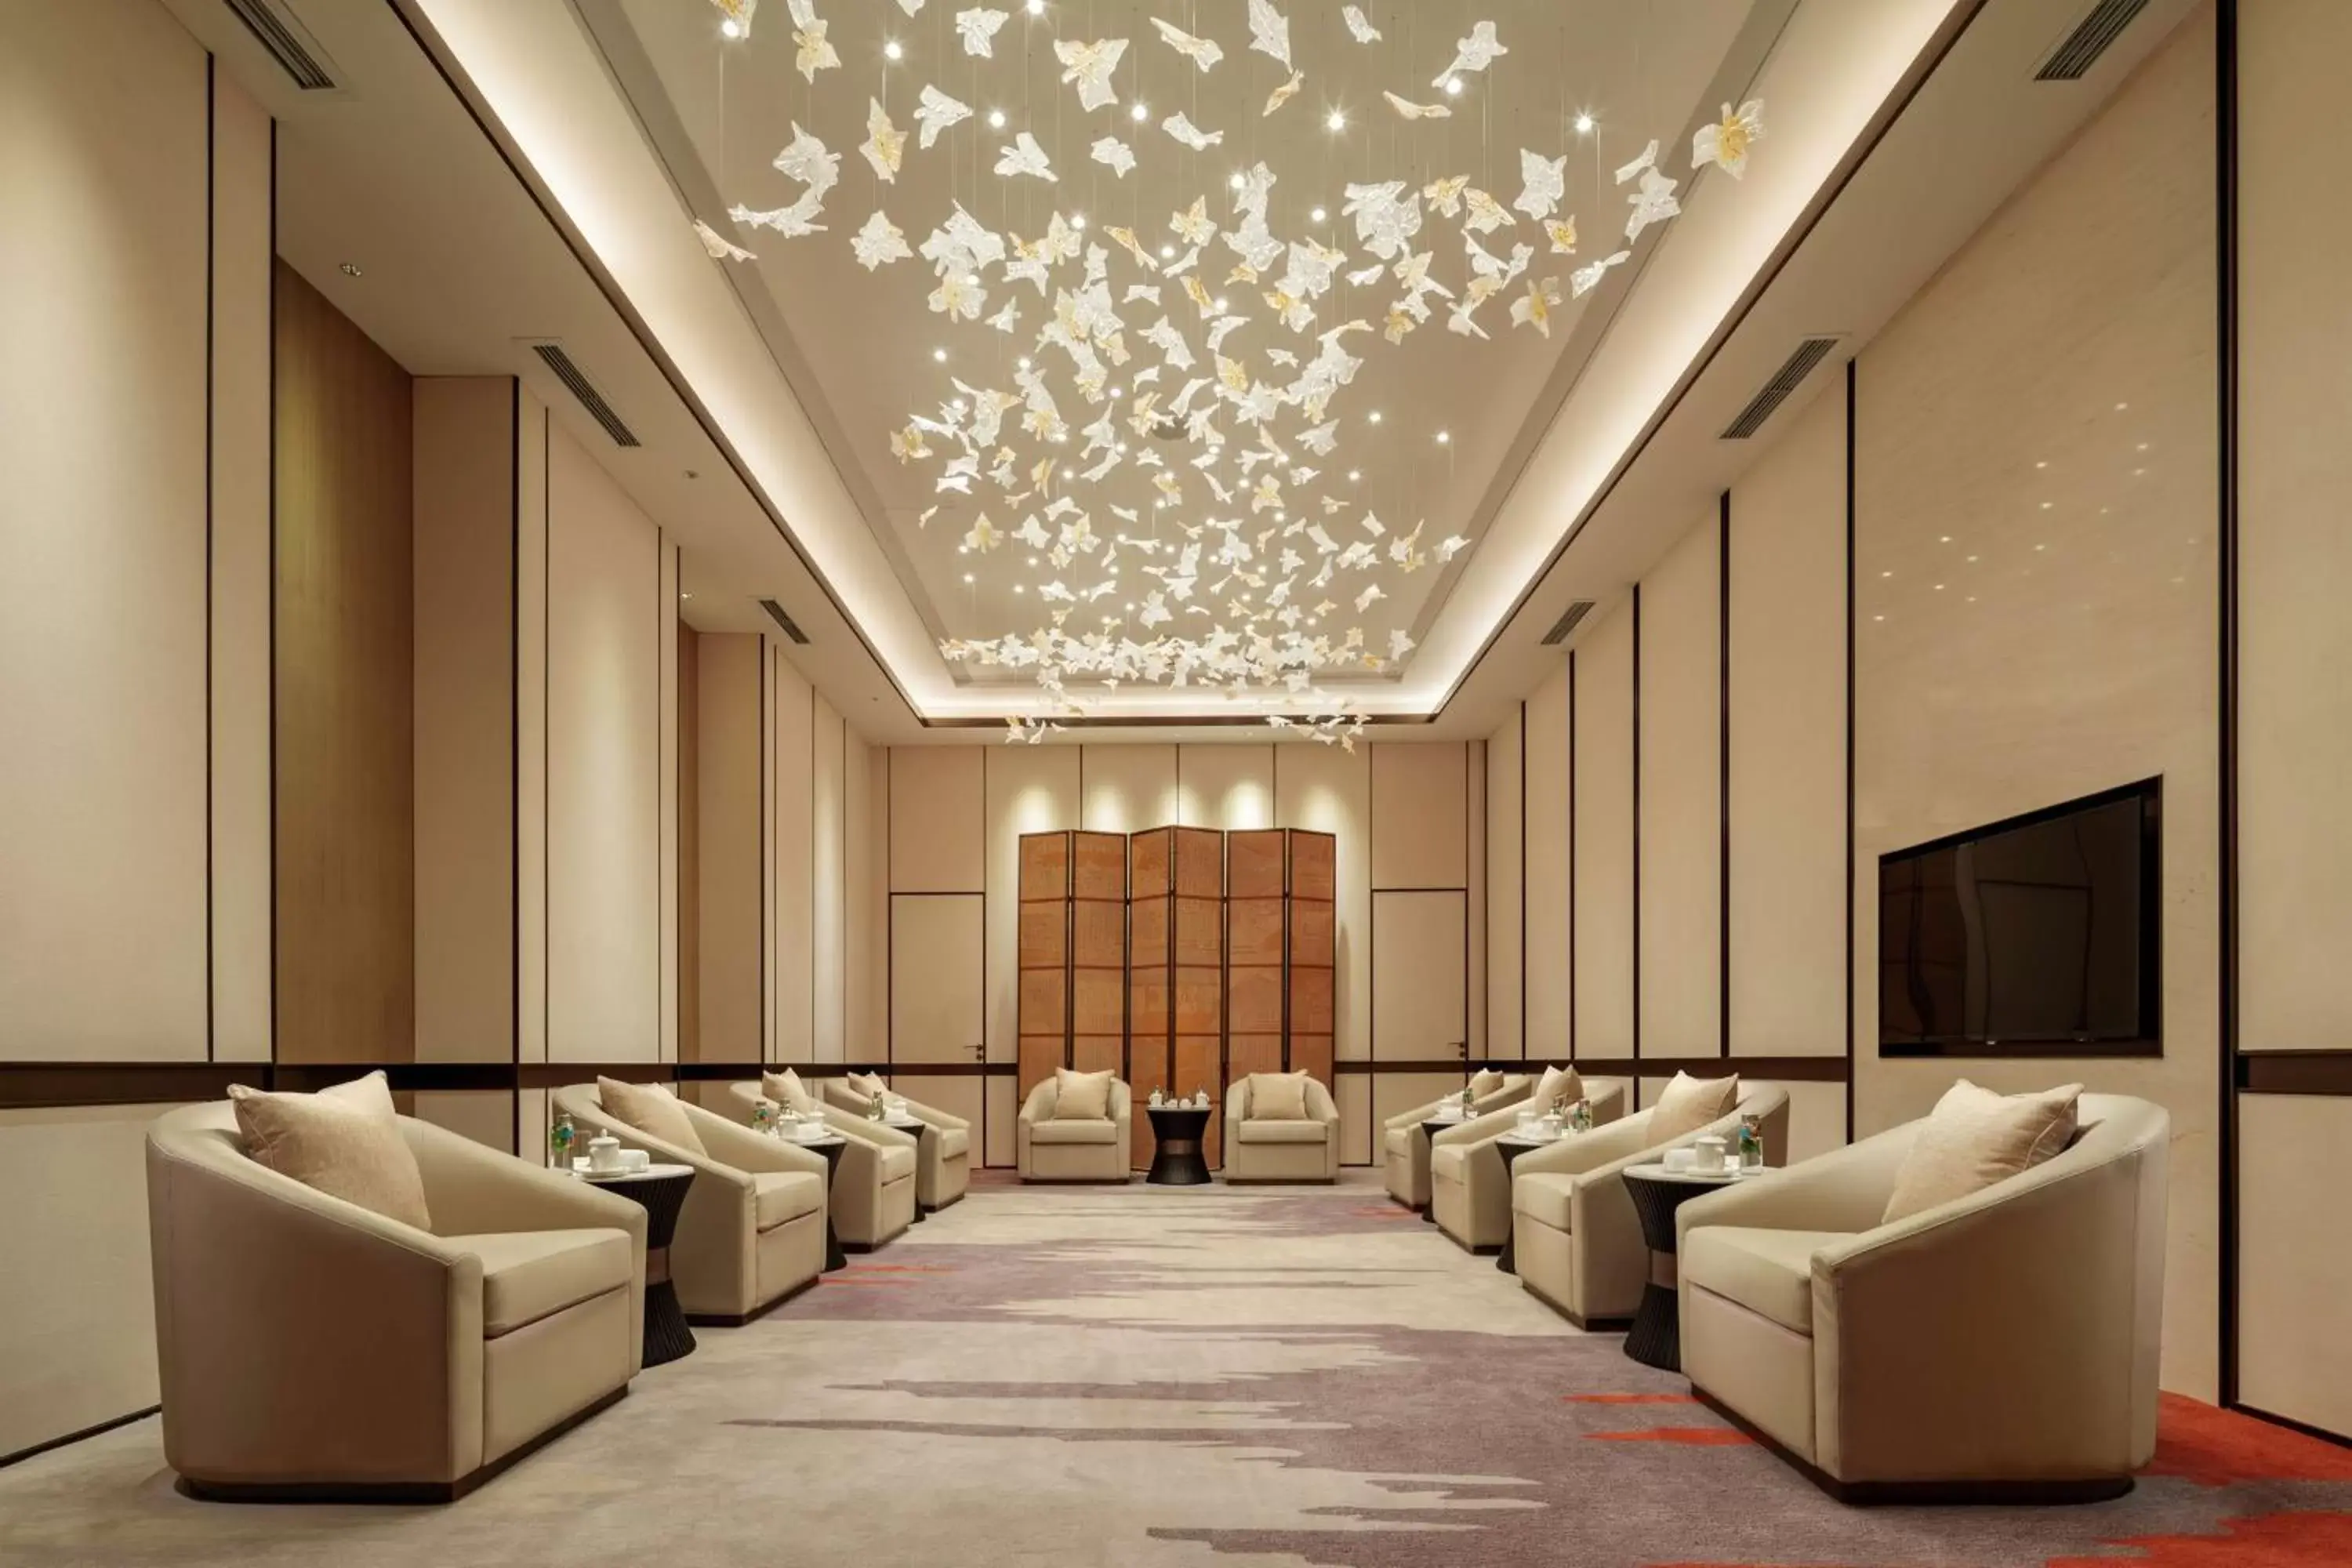 Meeting/conference room in Hilton Chengdu Chenghua